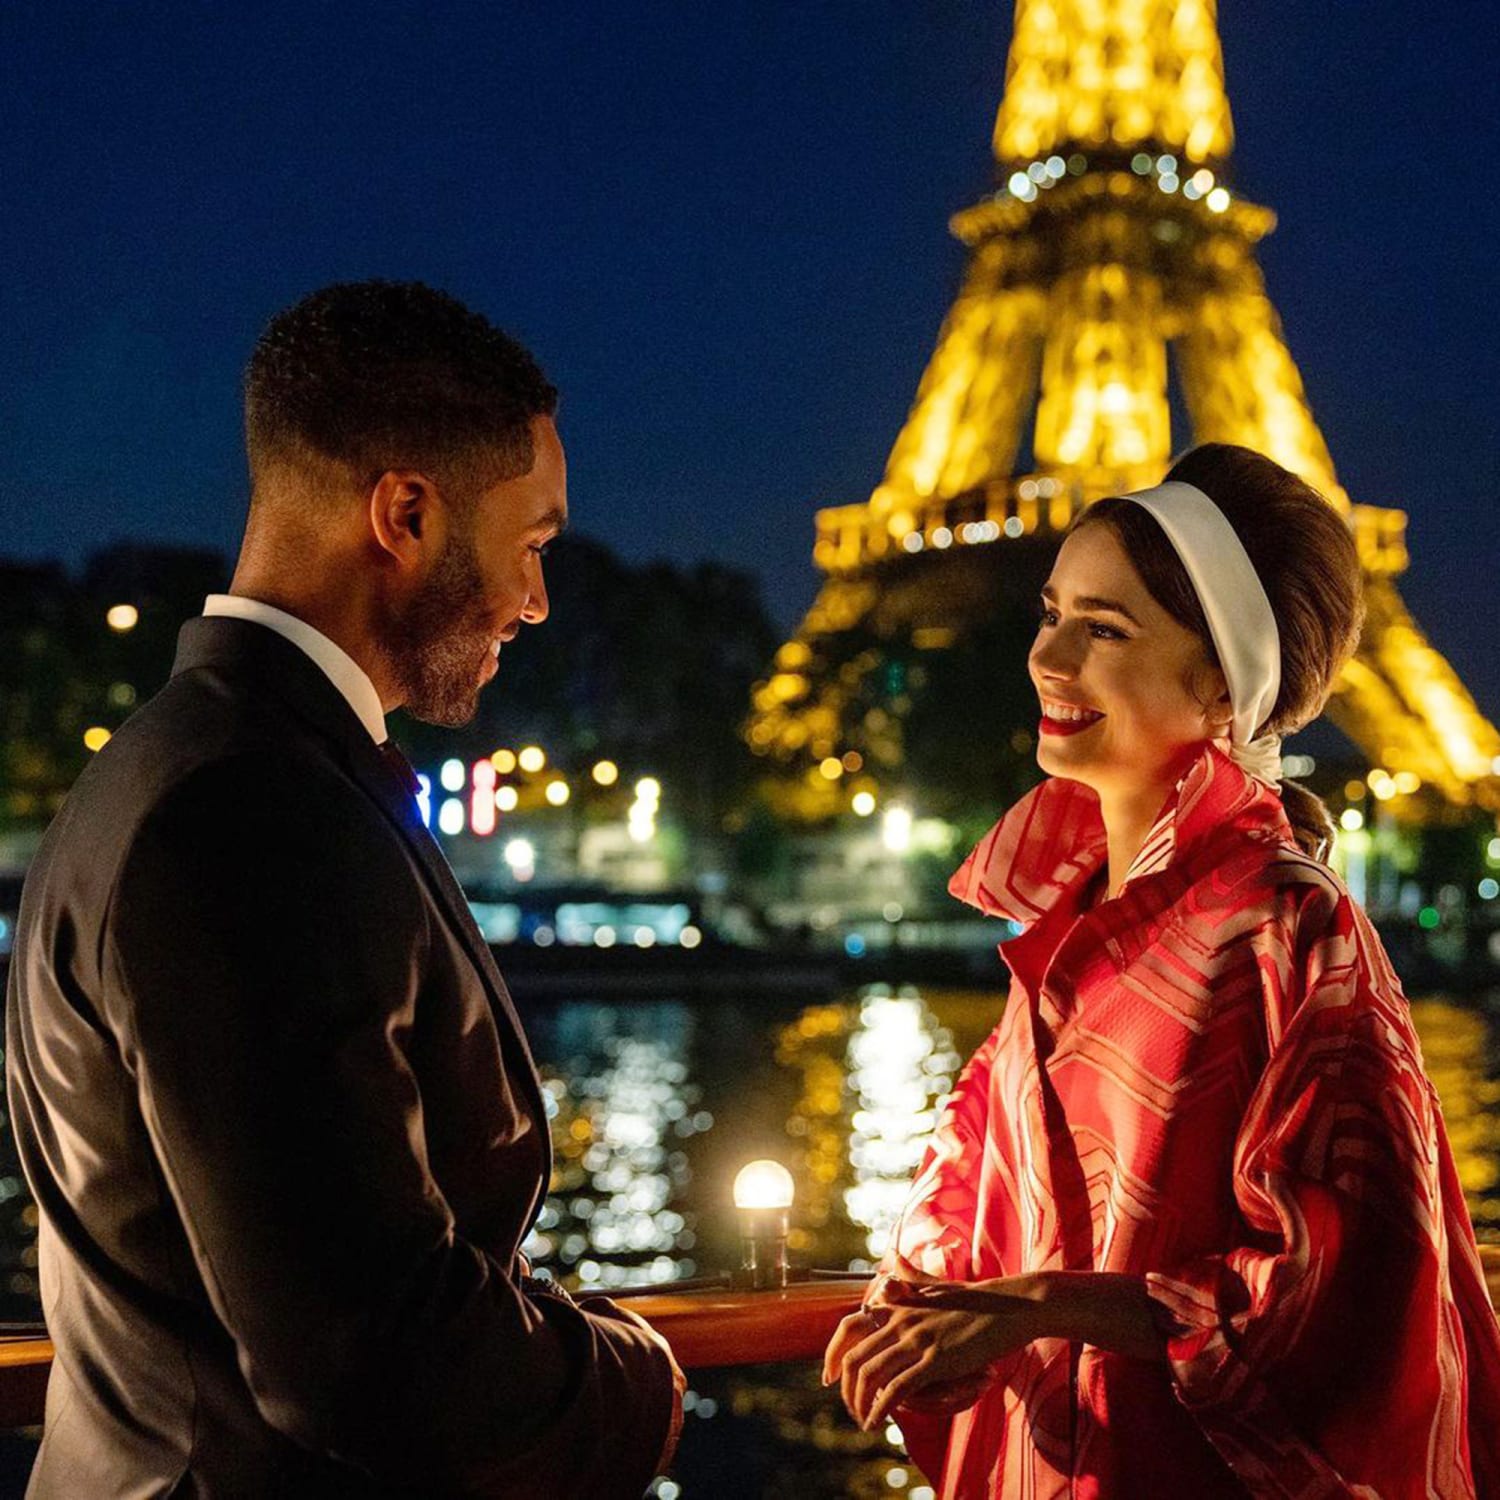 13 spots you'll want to visit after binging Emily in Paris season two